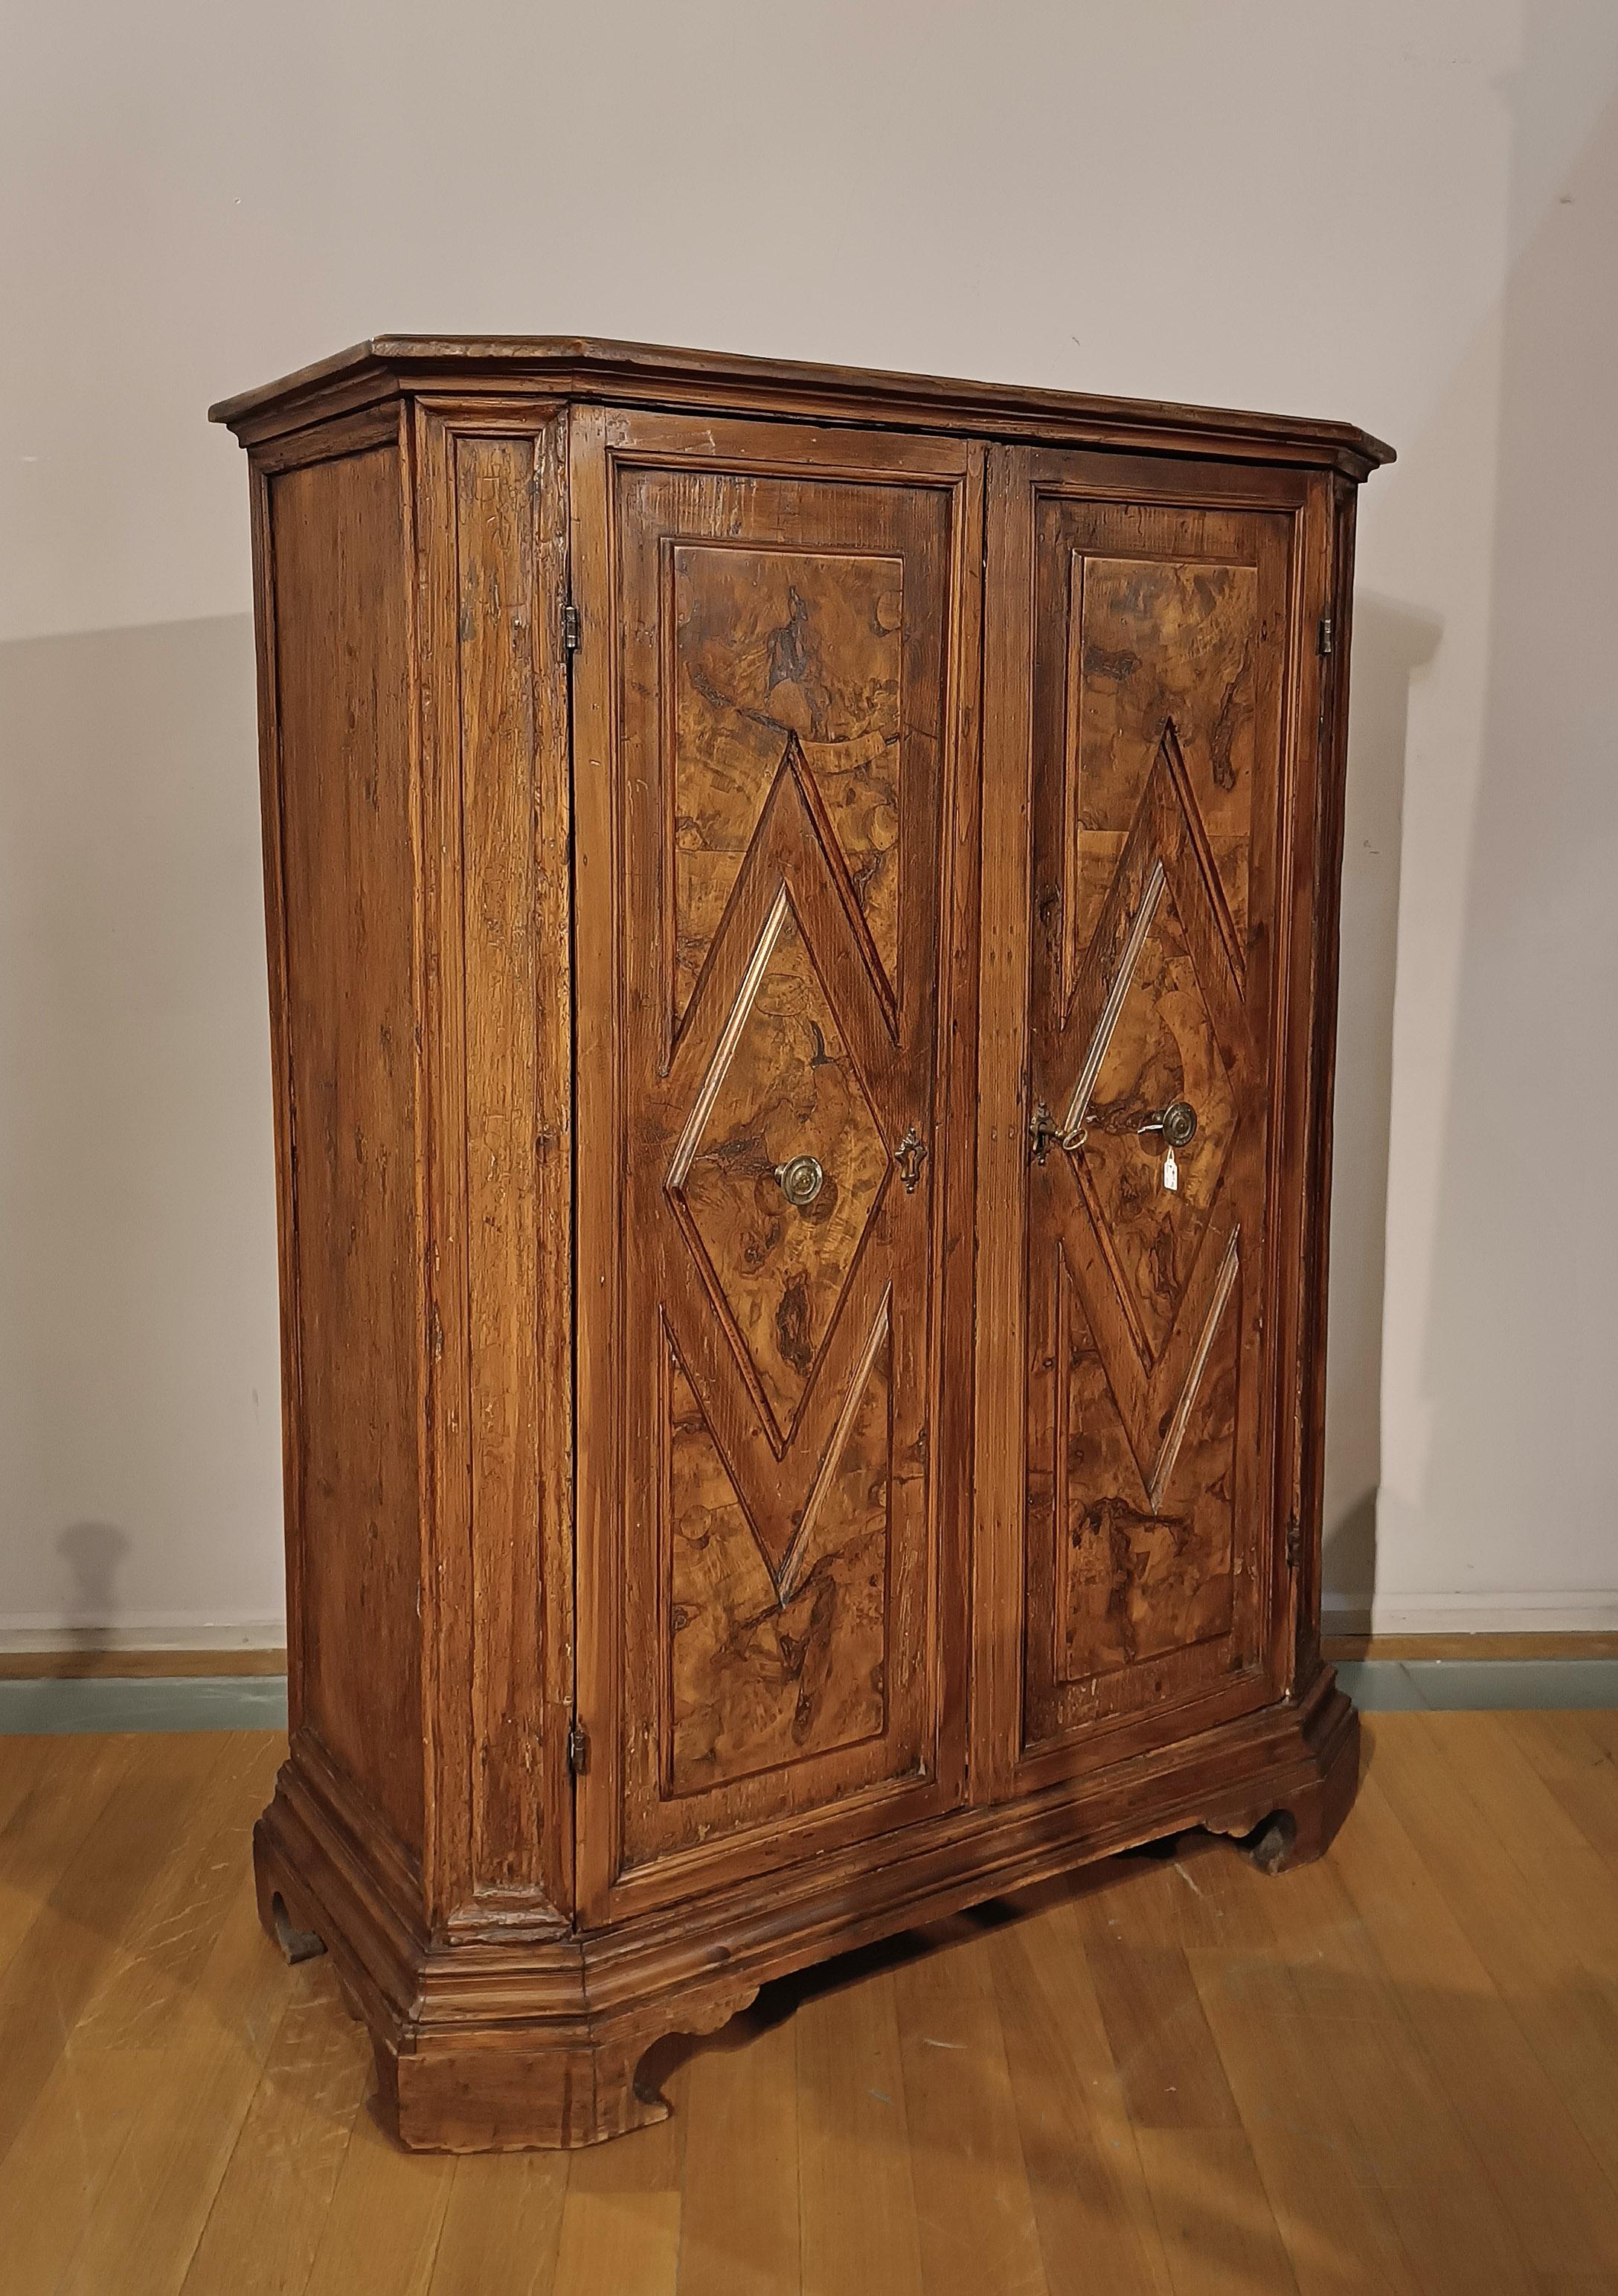 Beautiful cabinet with two doors in soft wood, with walnut briar tiles and blonde half-luster finish. The carved decoration is linear and geometric, visible both on the front and on the sides. The base is shelf-like, while the top is smooth with a